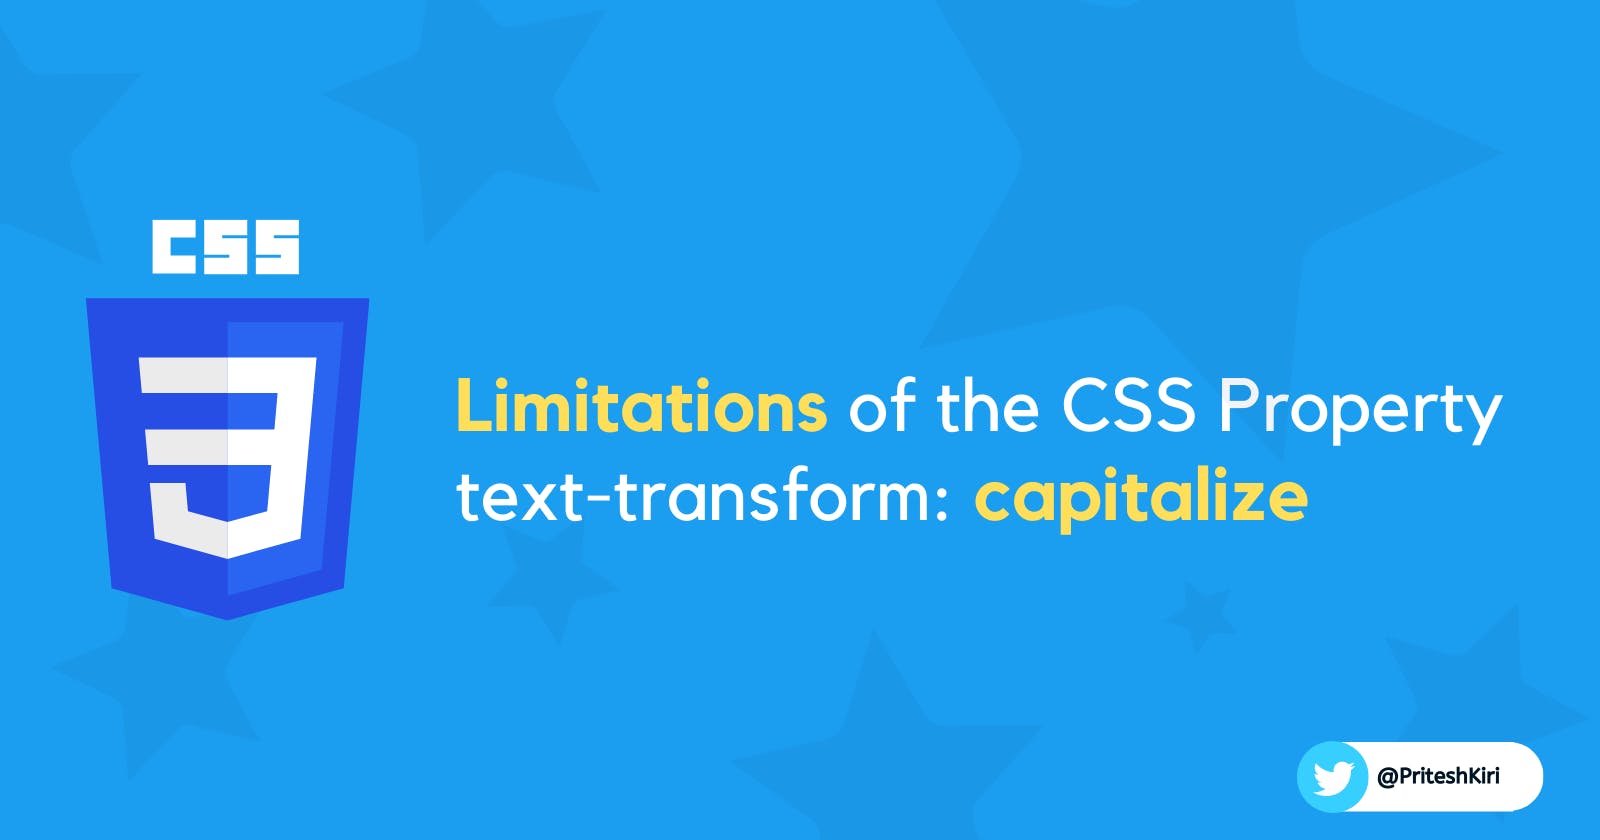 Limitations of the CSS Property text-transform: capitalize